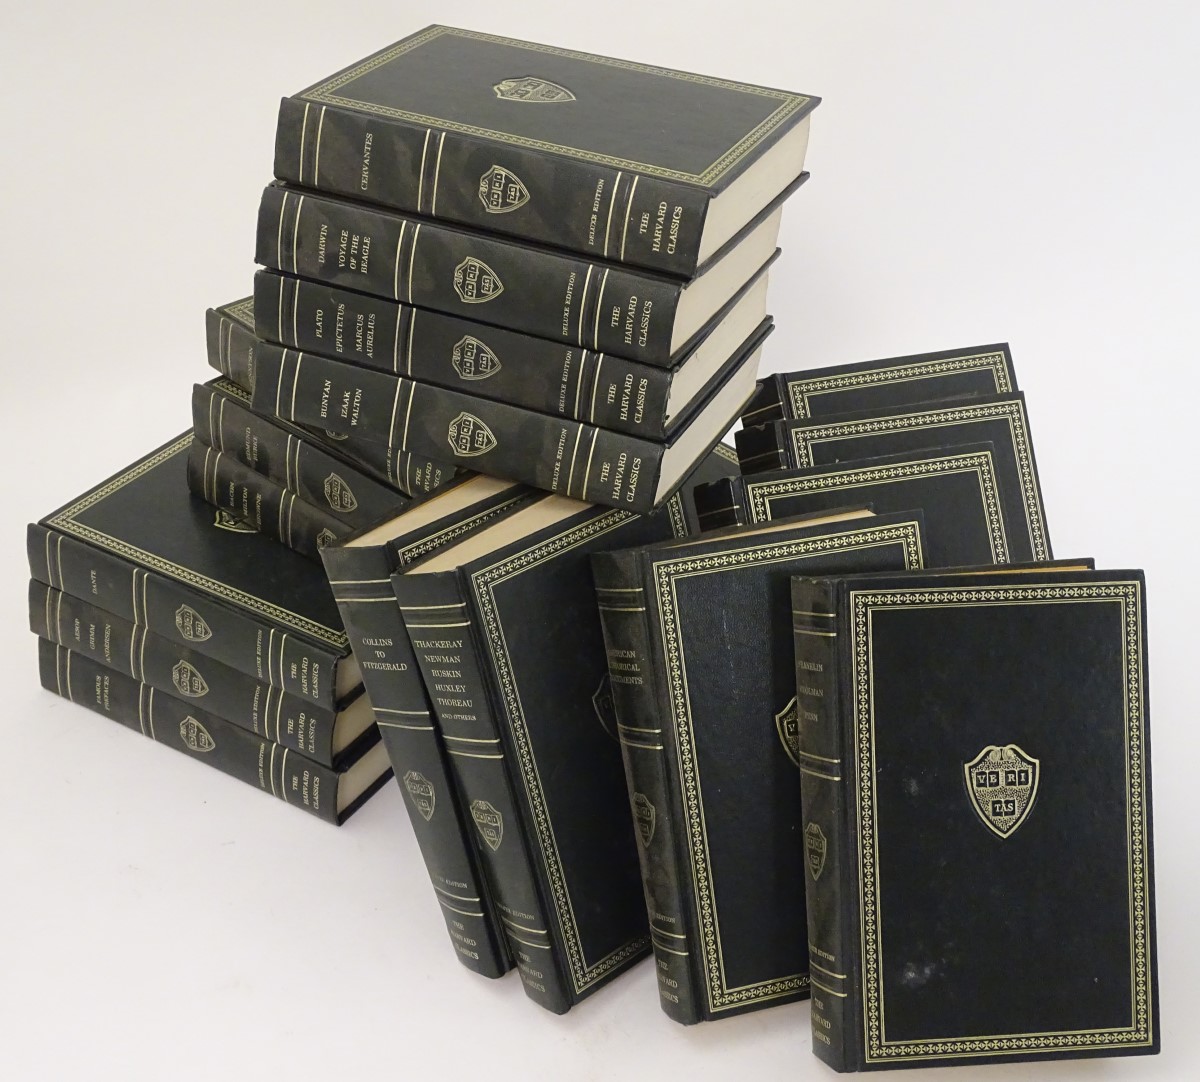 Books: A set of Harvard Classics books including Dante, Bacon Milton Browne, Chaucer to Gray,